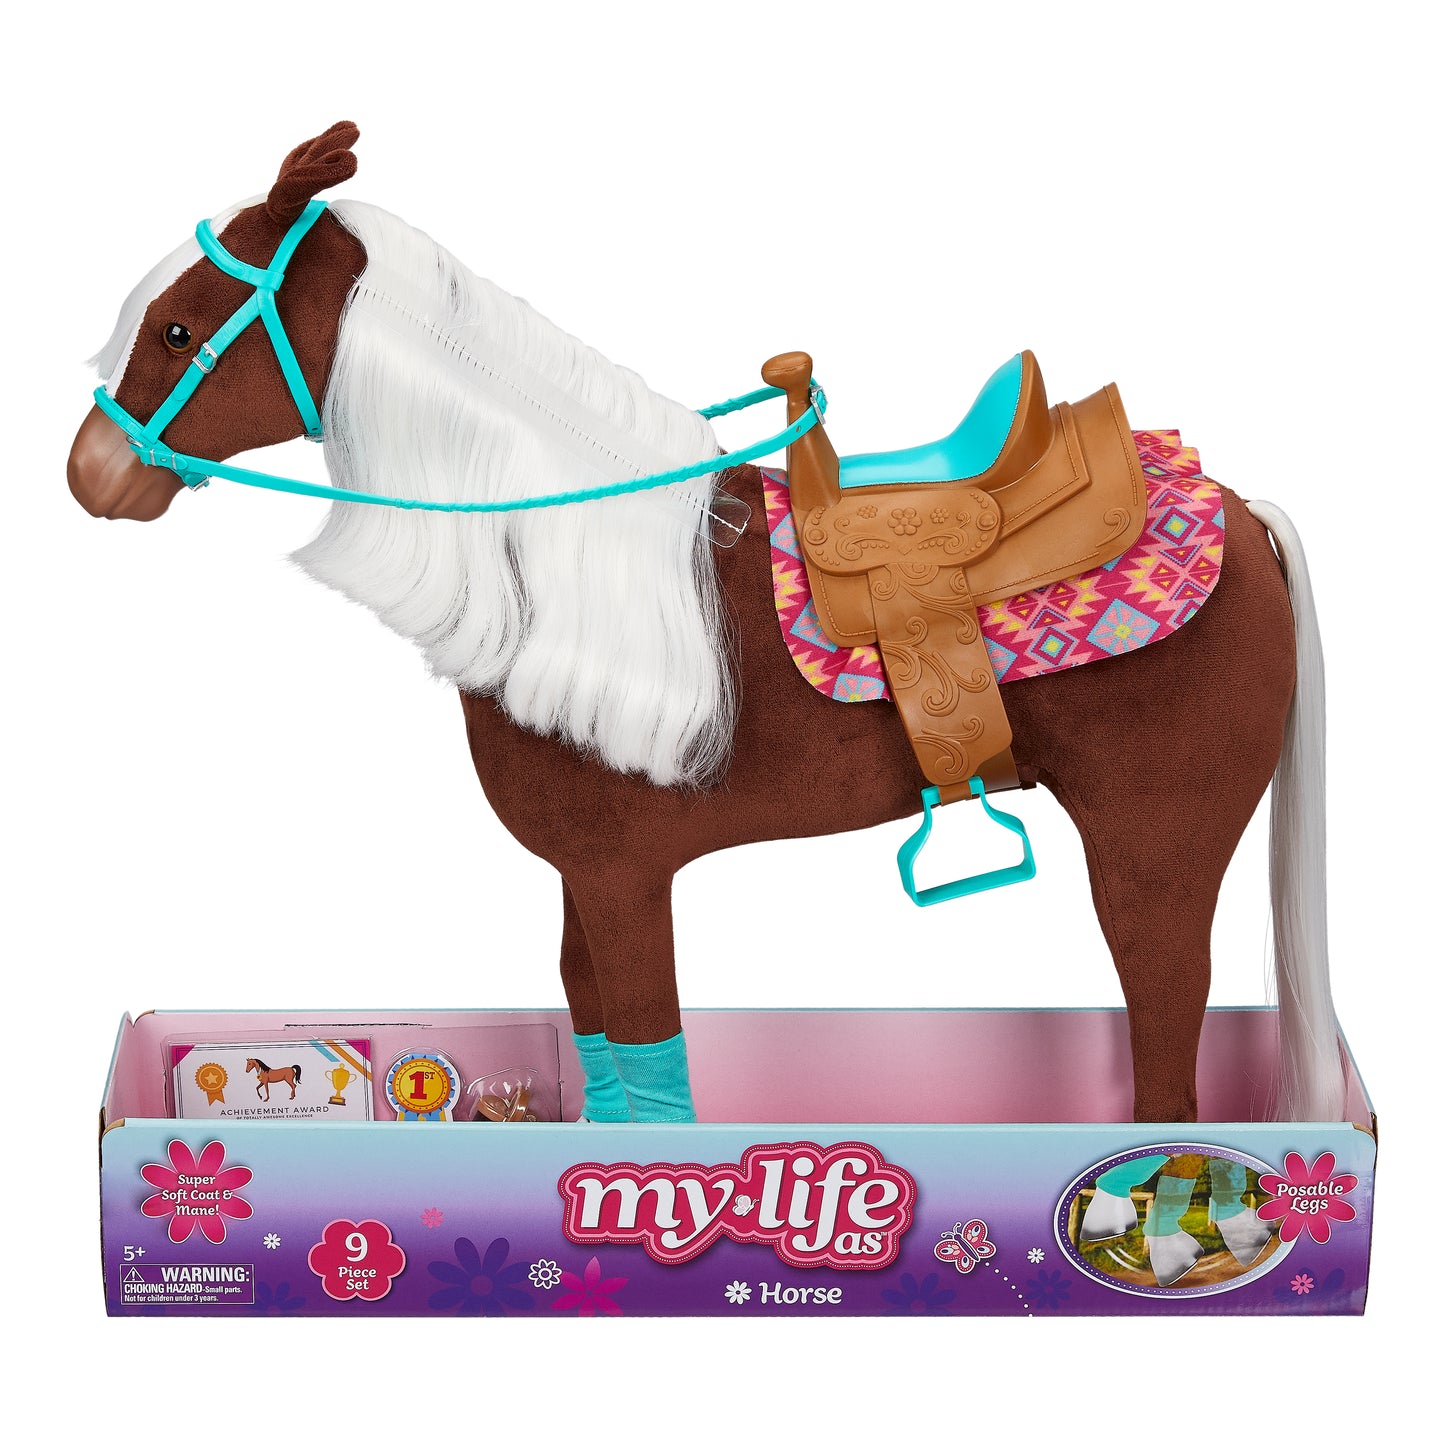 My Life As 18-inch Poseable Horse Doll Play Set for 18" Dolls, 9 Pieces Included, Random Colors Pick